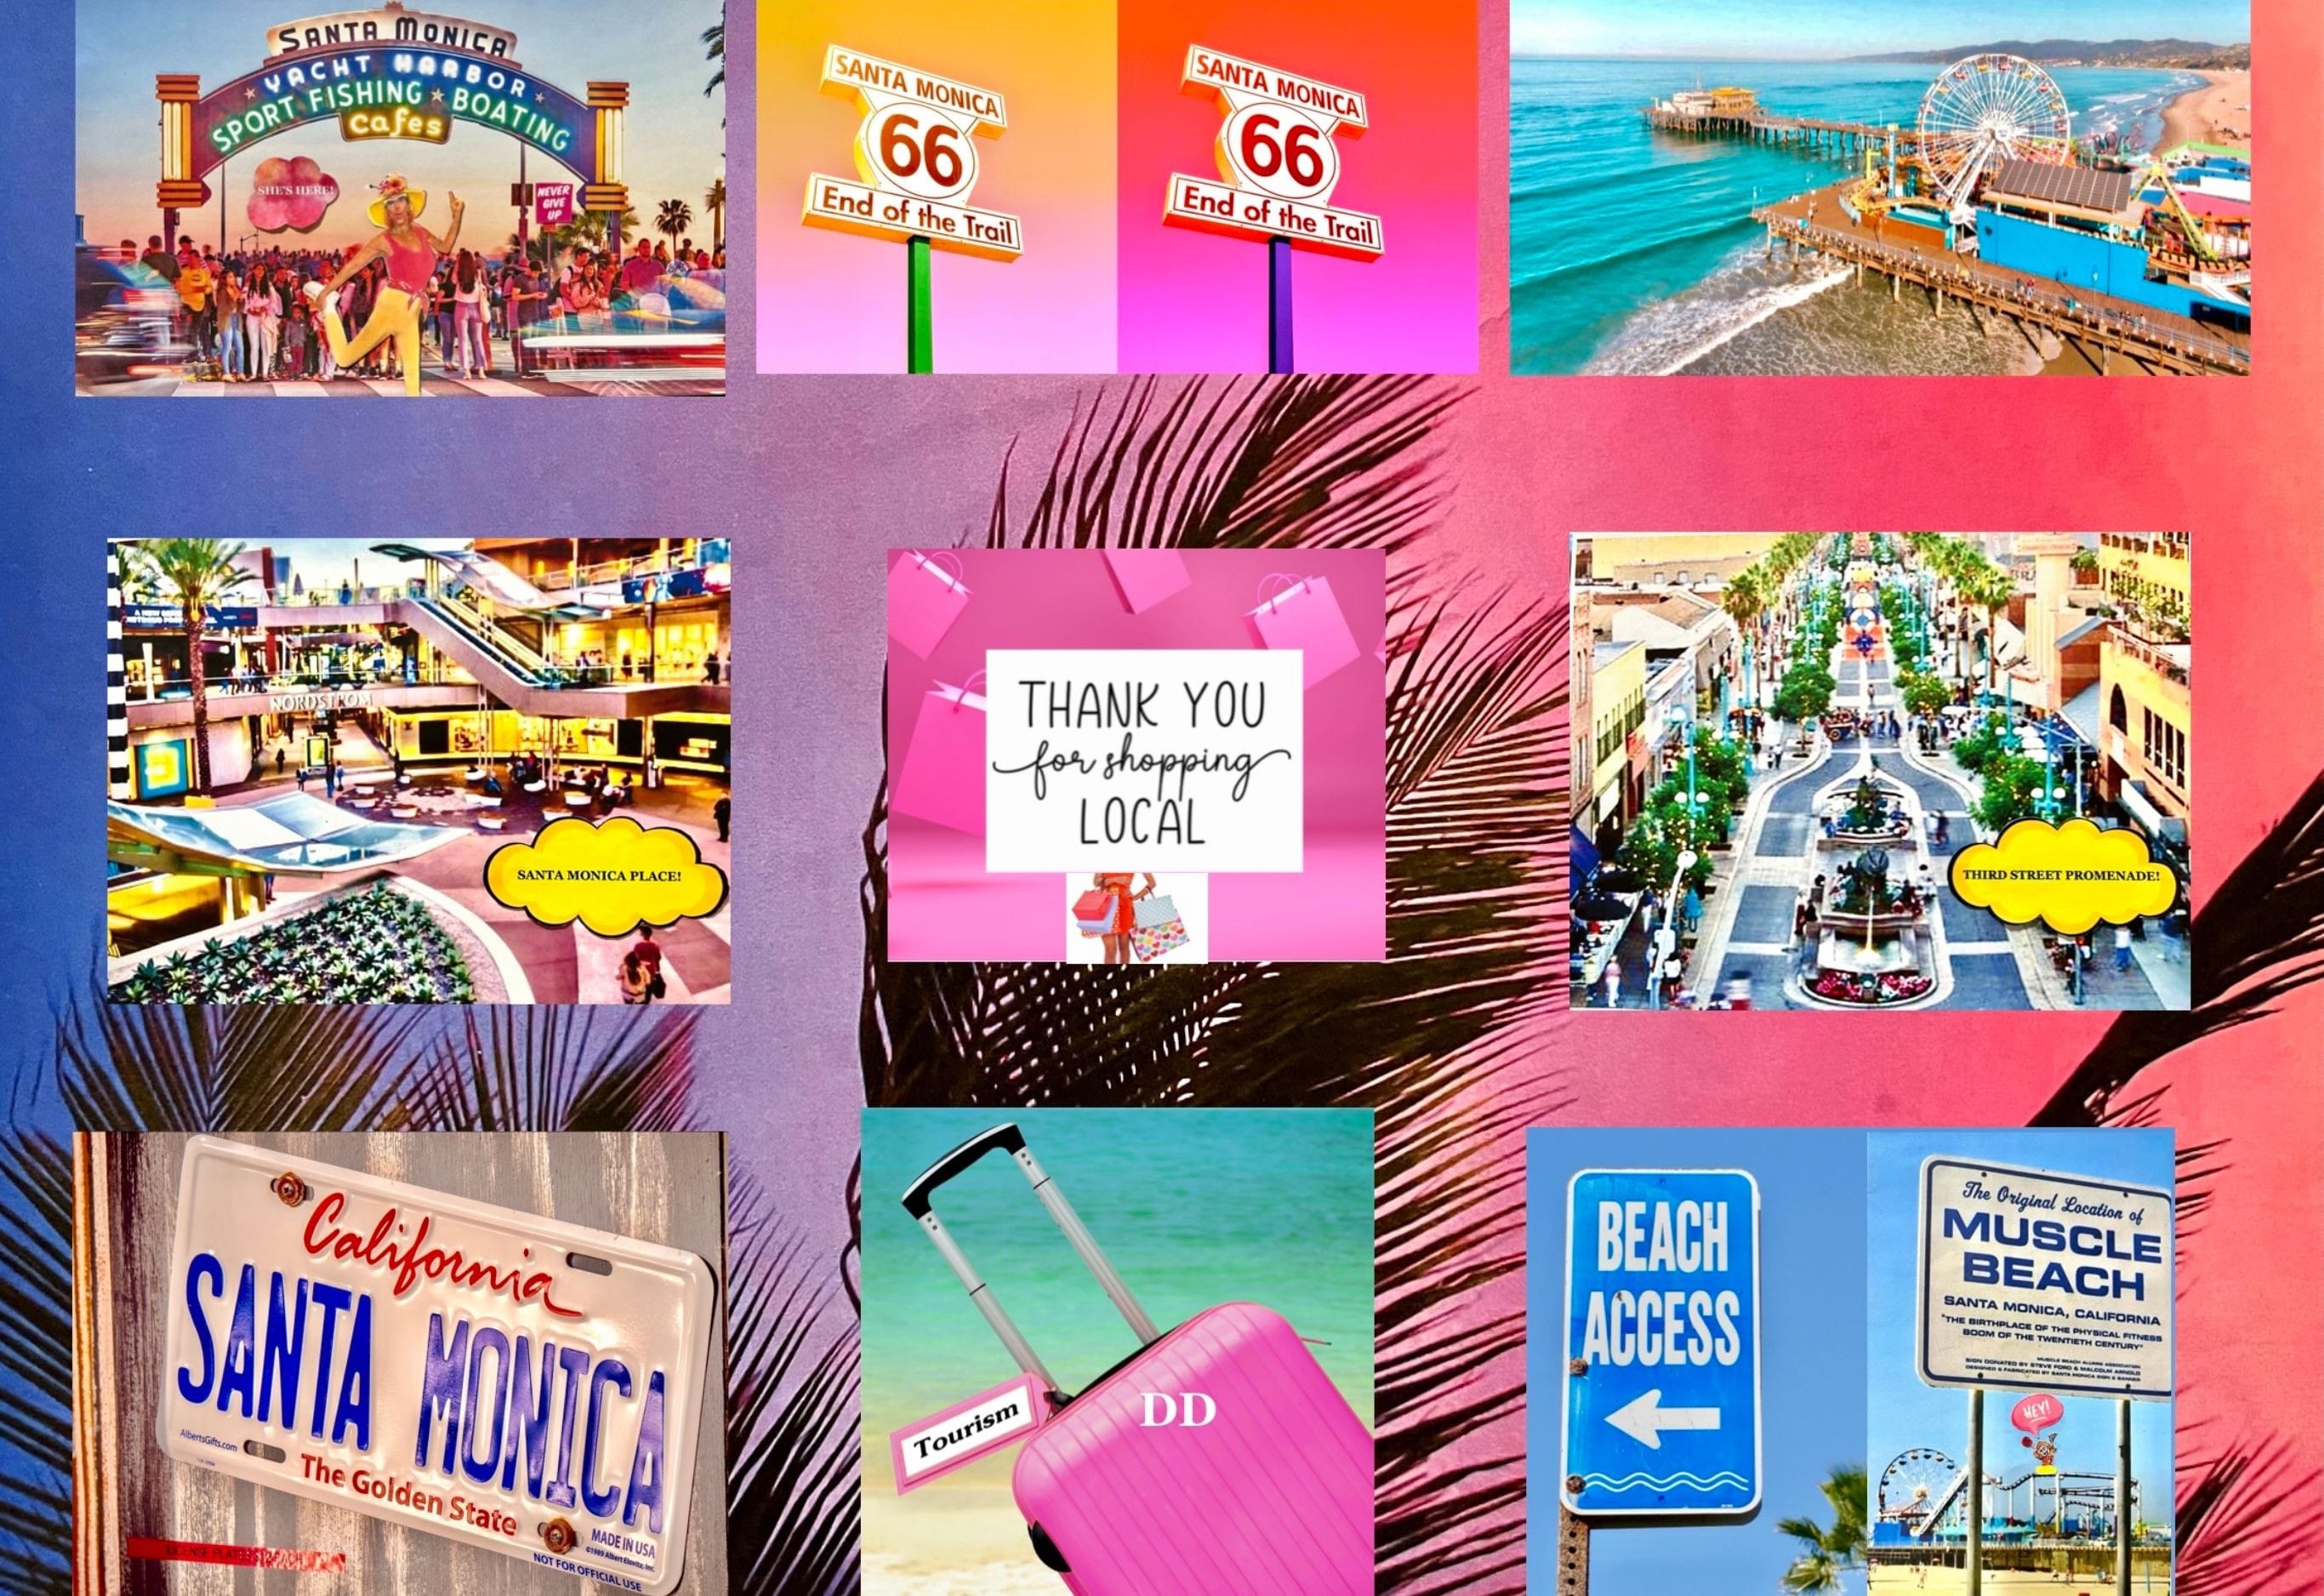 Santa Monica Pier activities, to Route 66, to Shopping Local, to Santa Monica Place, Third Street Promenade, to Muscle Beach, Santa Monica Tourism showcases it!